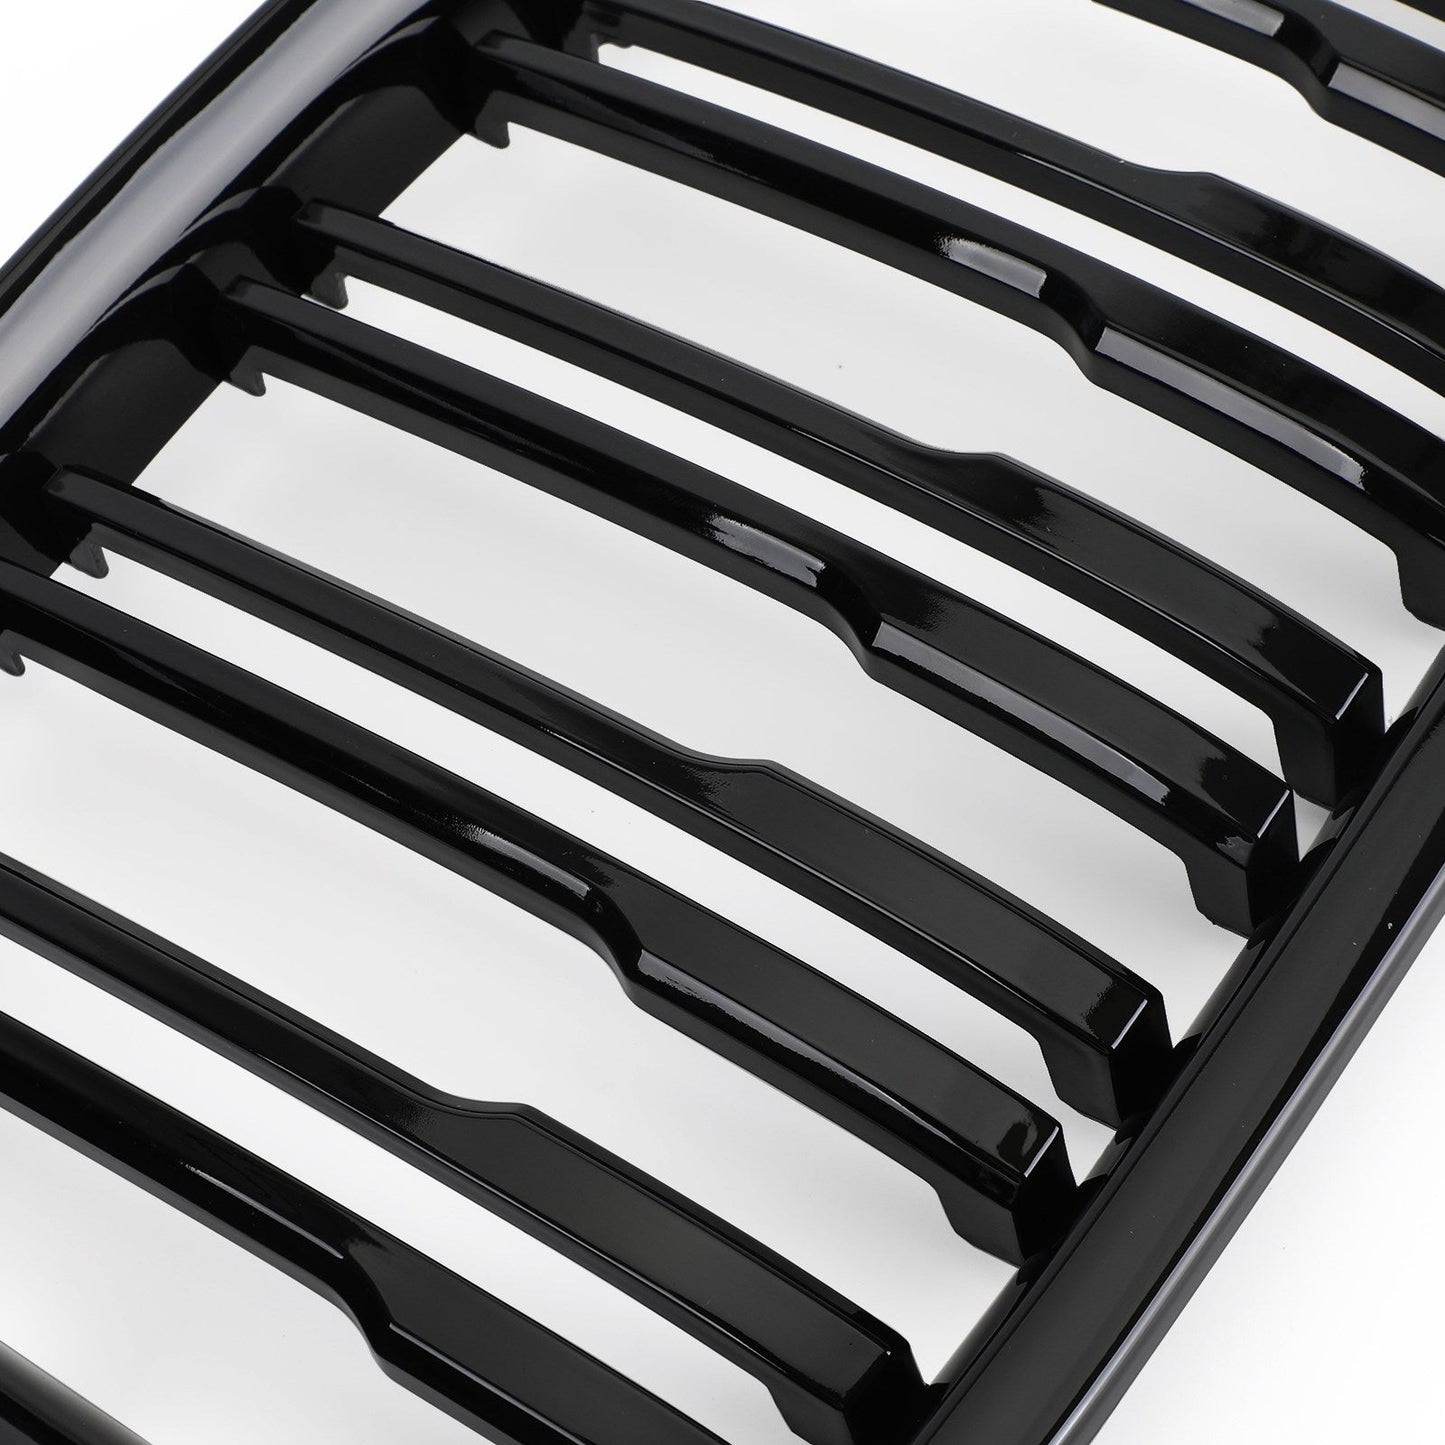 2009-2014 BMW X1 E84 Gloss Black Dual Slats Front Hood Kidney Grill Grille